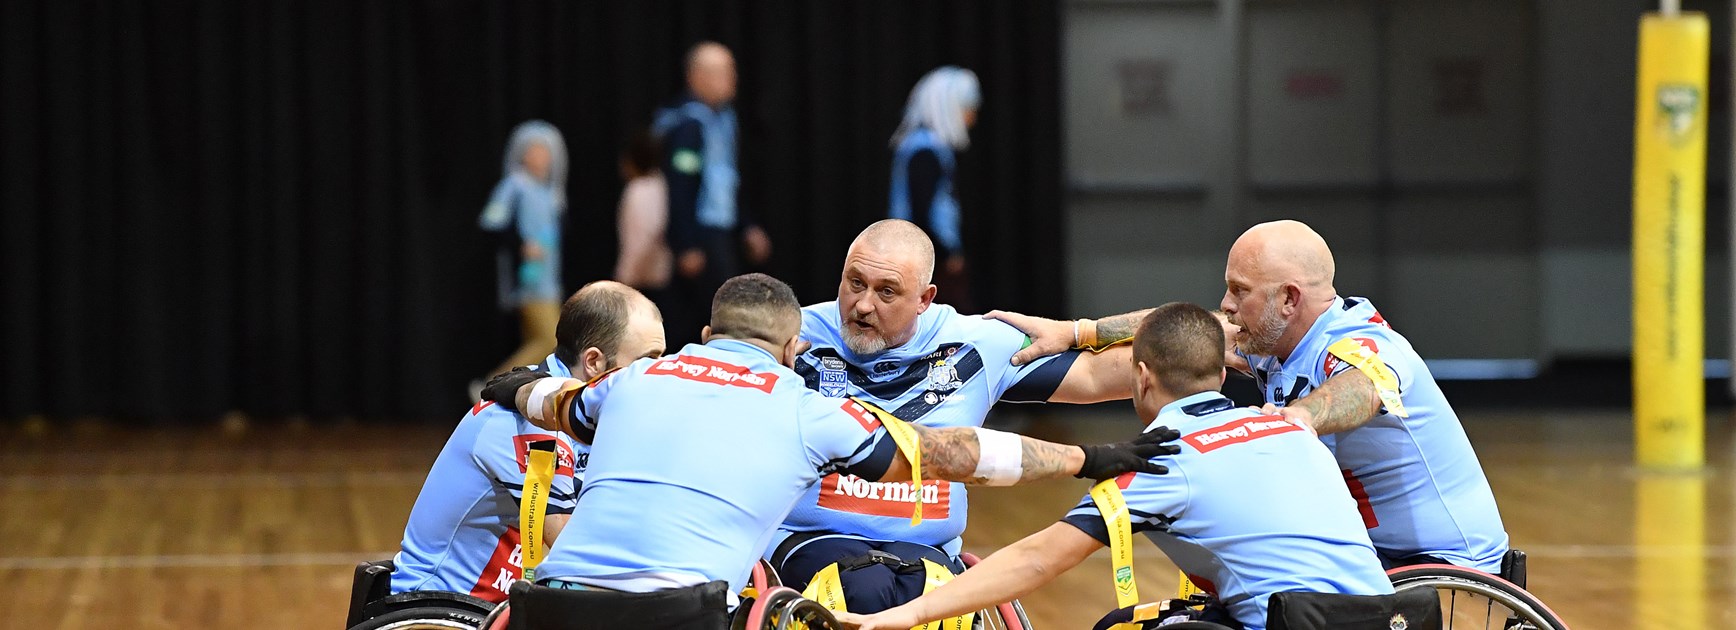 2020 Preview | NSW Wheelchair Rugby League